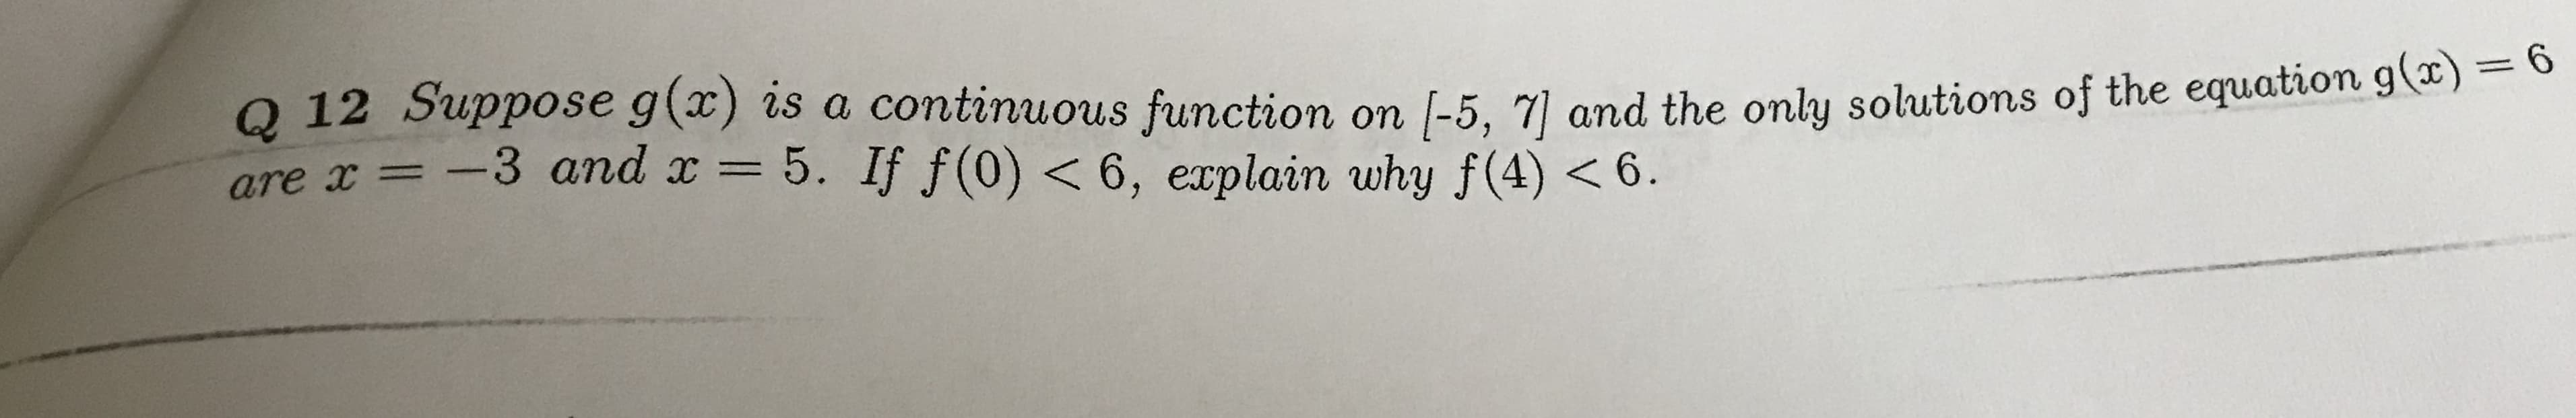 Q 12 Suppose g(x) is a continuous function on
are x -3 and x= 5. If f(0) <6, explain why f(4) <6
(-5, 7 and the only solutions of the equation g(x)= 6
